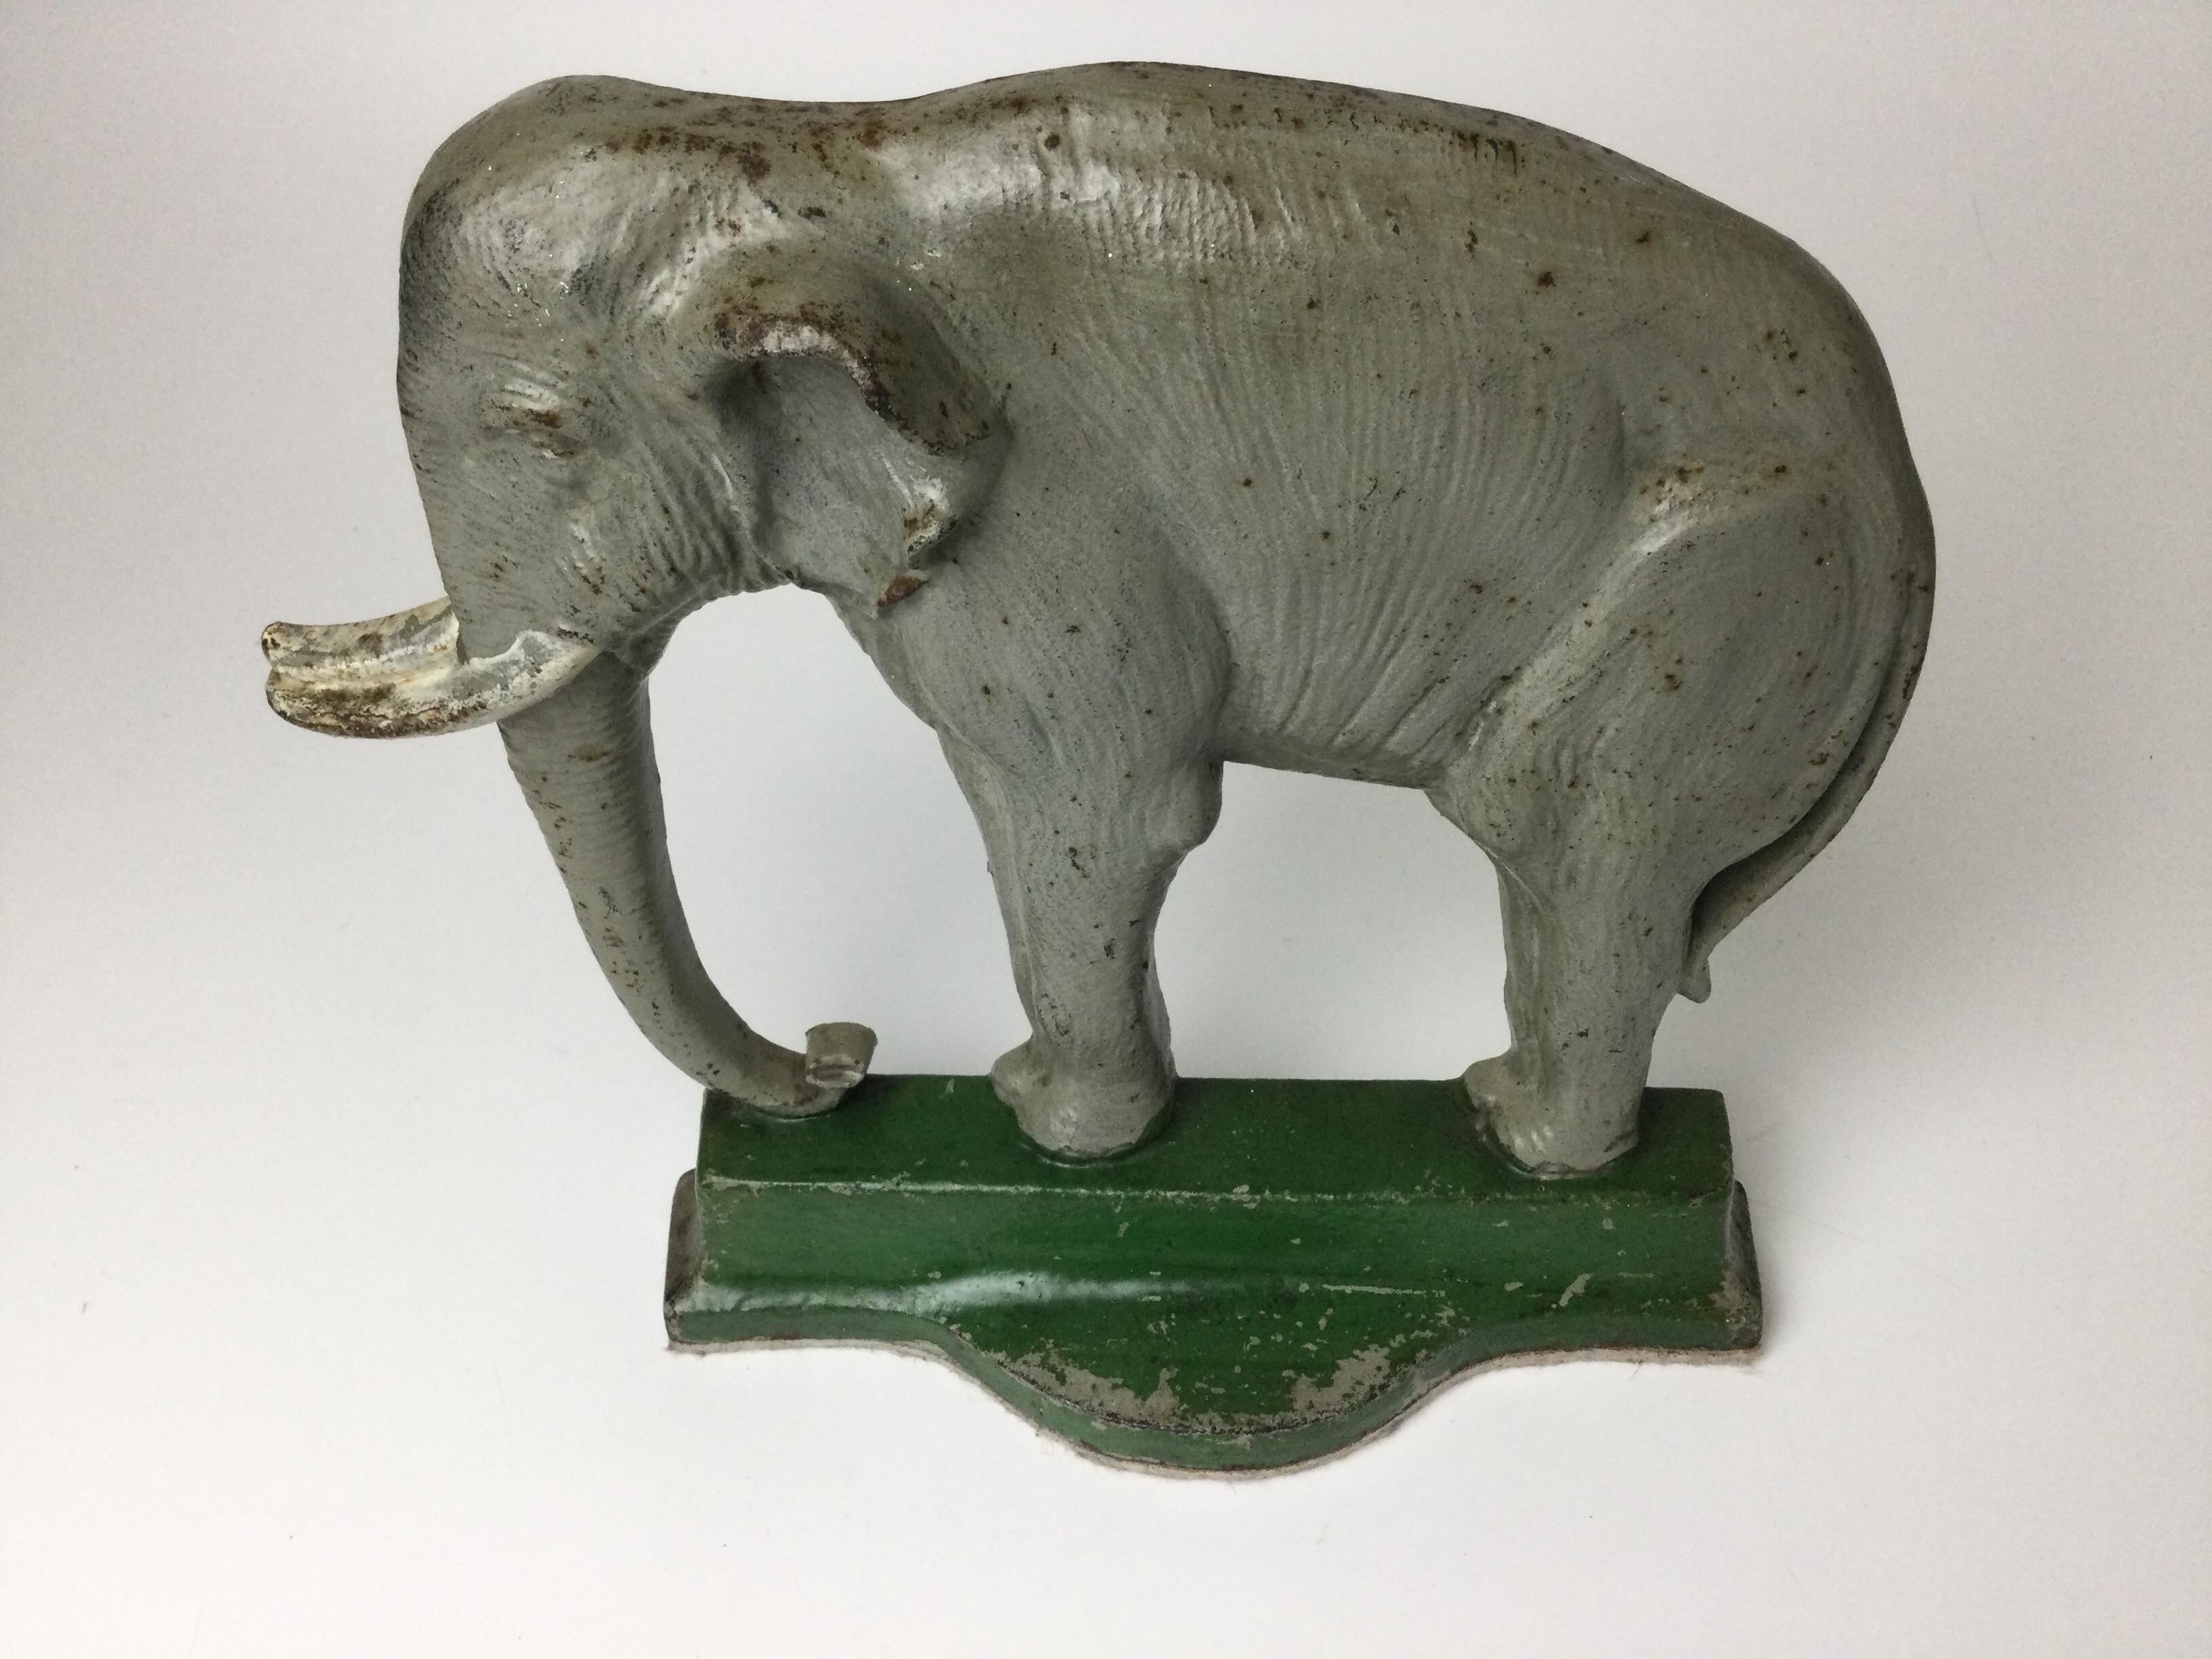 Early 20th c. cast iron Elephant form doorstop by Bradley & Hubbard, original painted surface, back is marked 'B&H' and '7799', 10 3/4